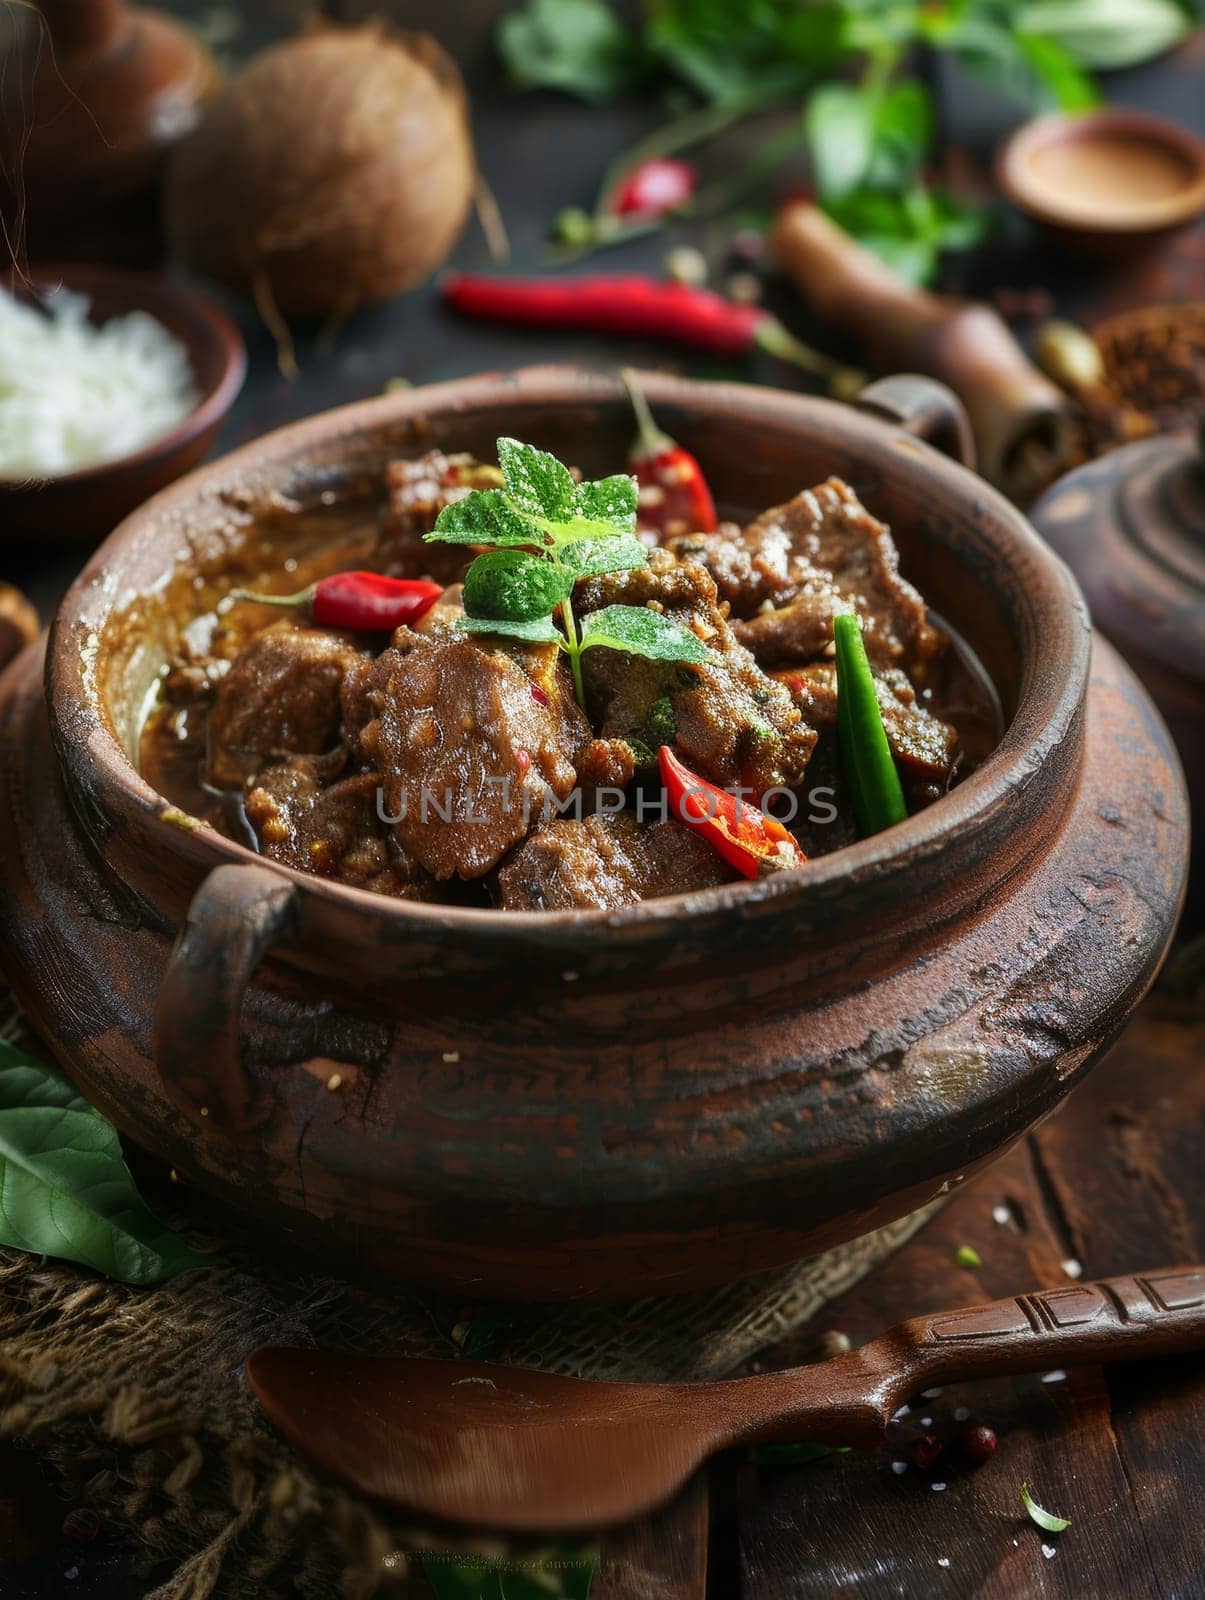 Authentic Indonesian rendang, a slow-cooked beef dish simmered in a rich coconut milk and spice-infused curry. This fragrant, tender, and flavorful Southeast Asian staple represents vibrant culinary. by sfinks